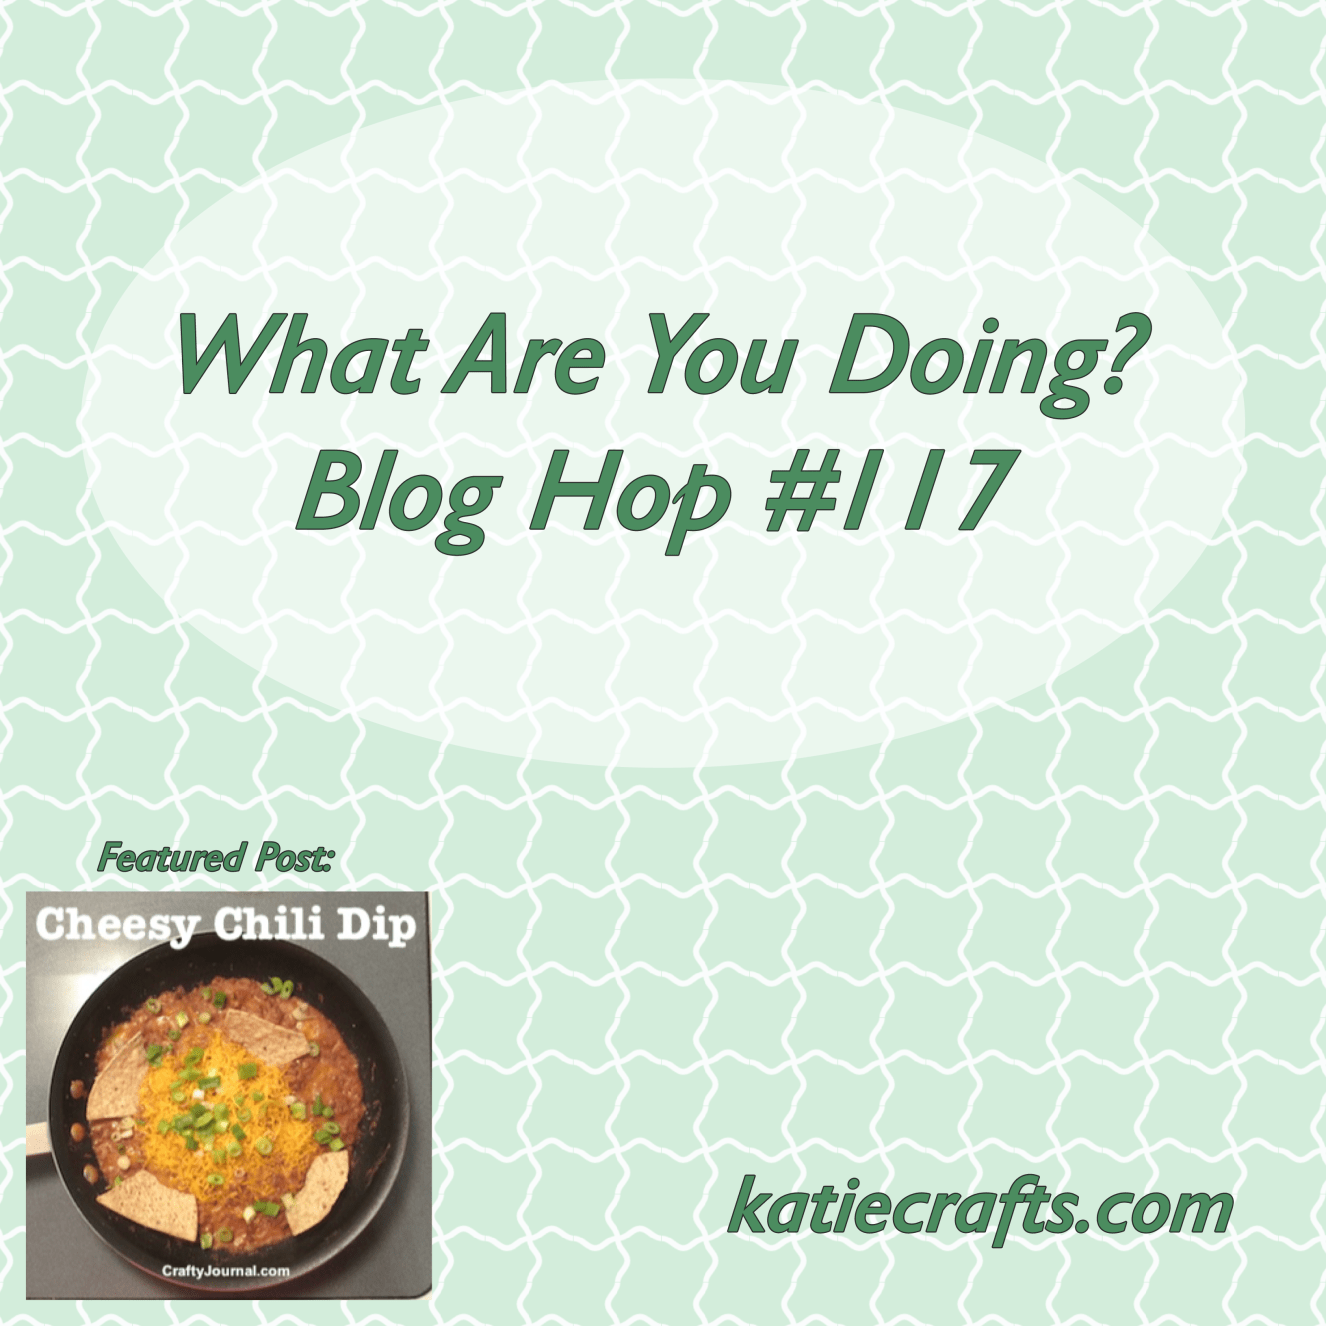 What Are You Doing? Blog Hop #117 on Katie Crafts; https://www.katiecrafts.com